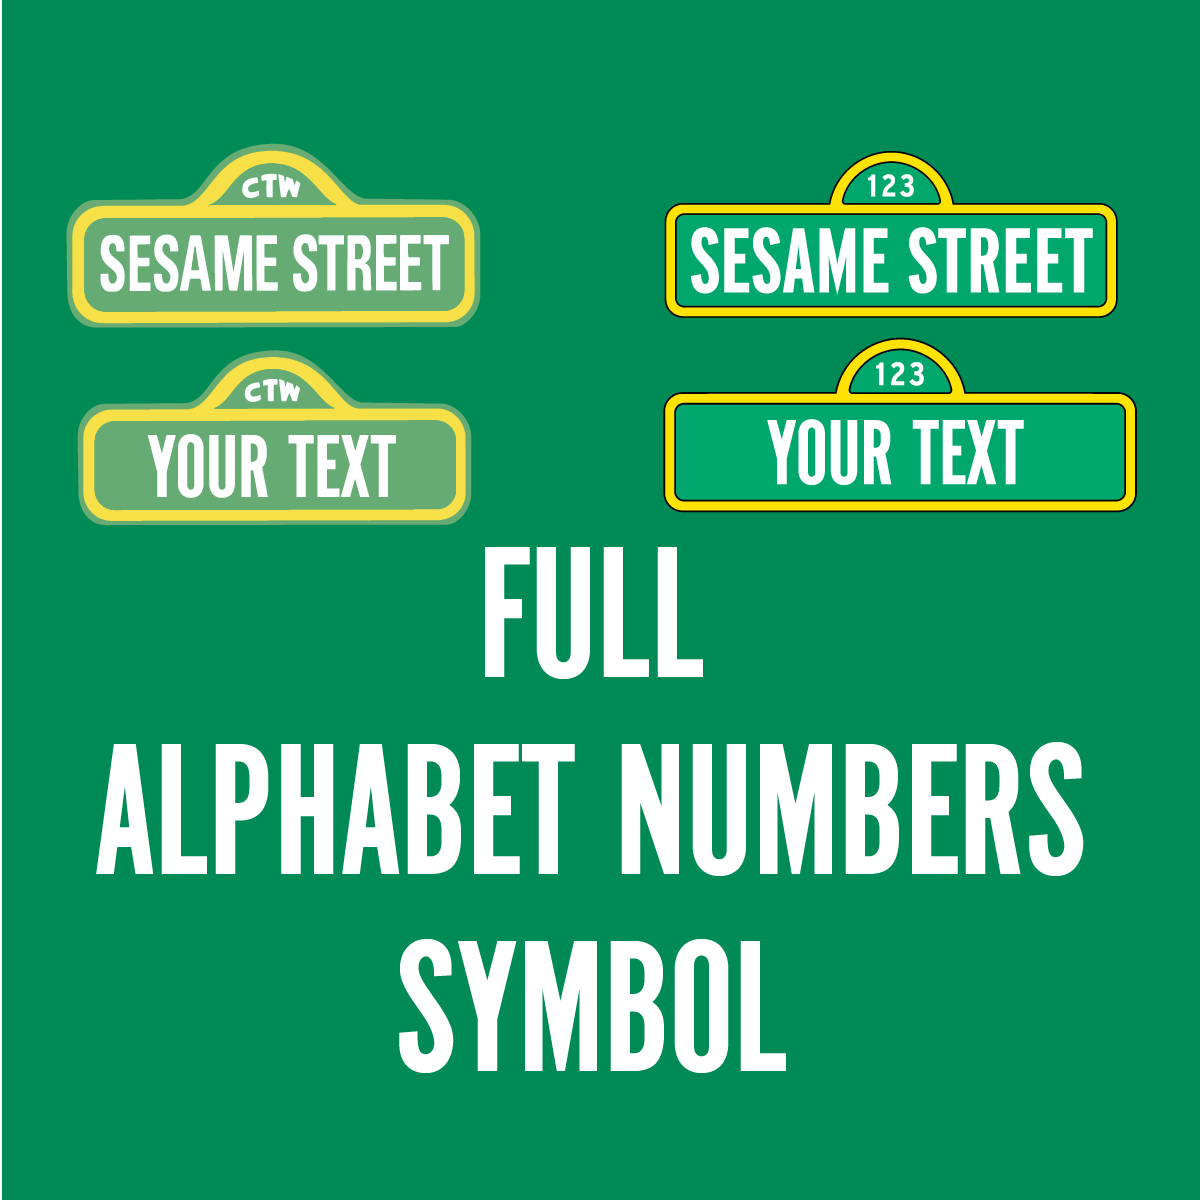 what is the sesame street font